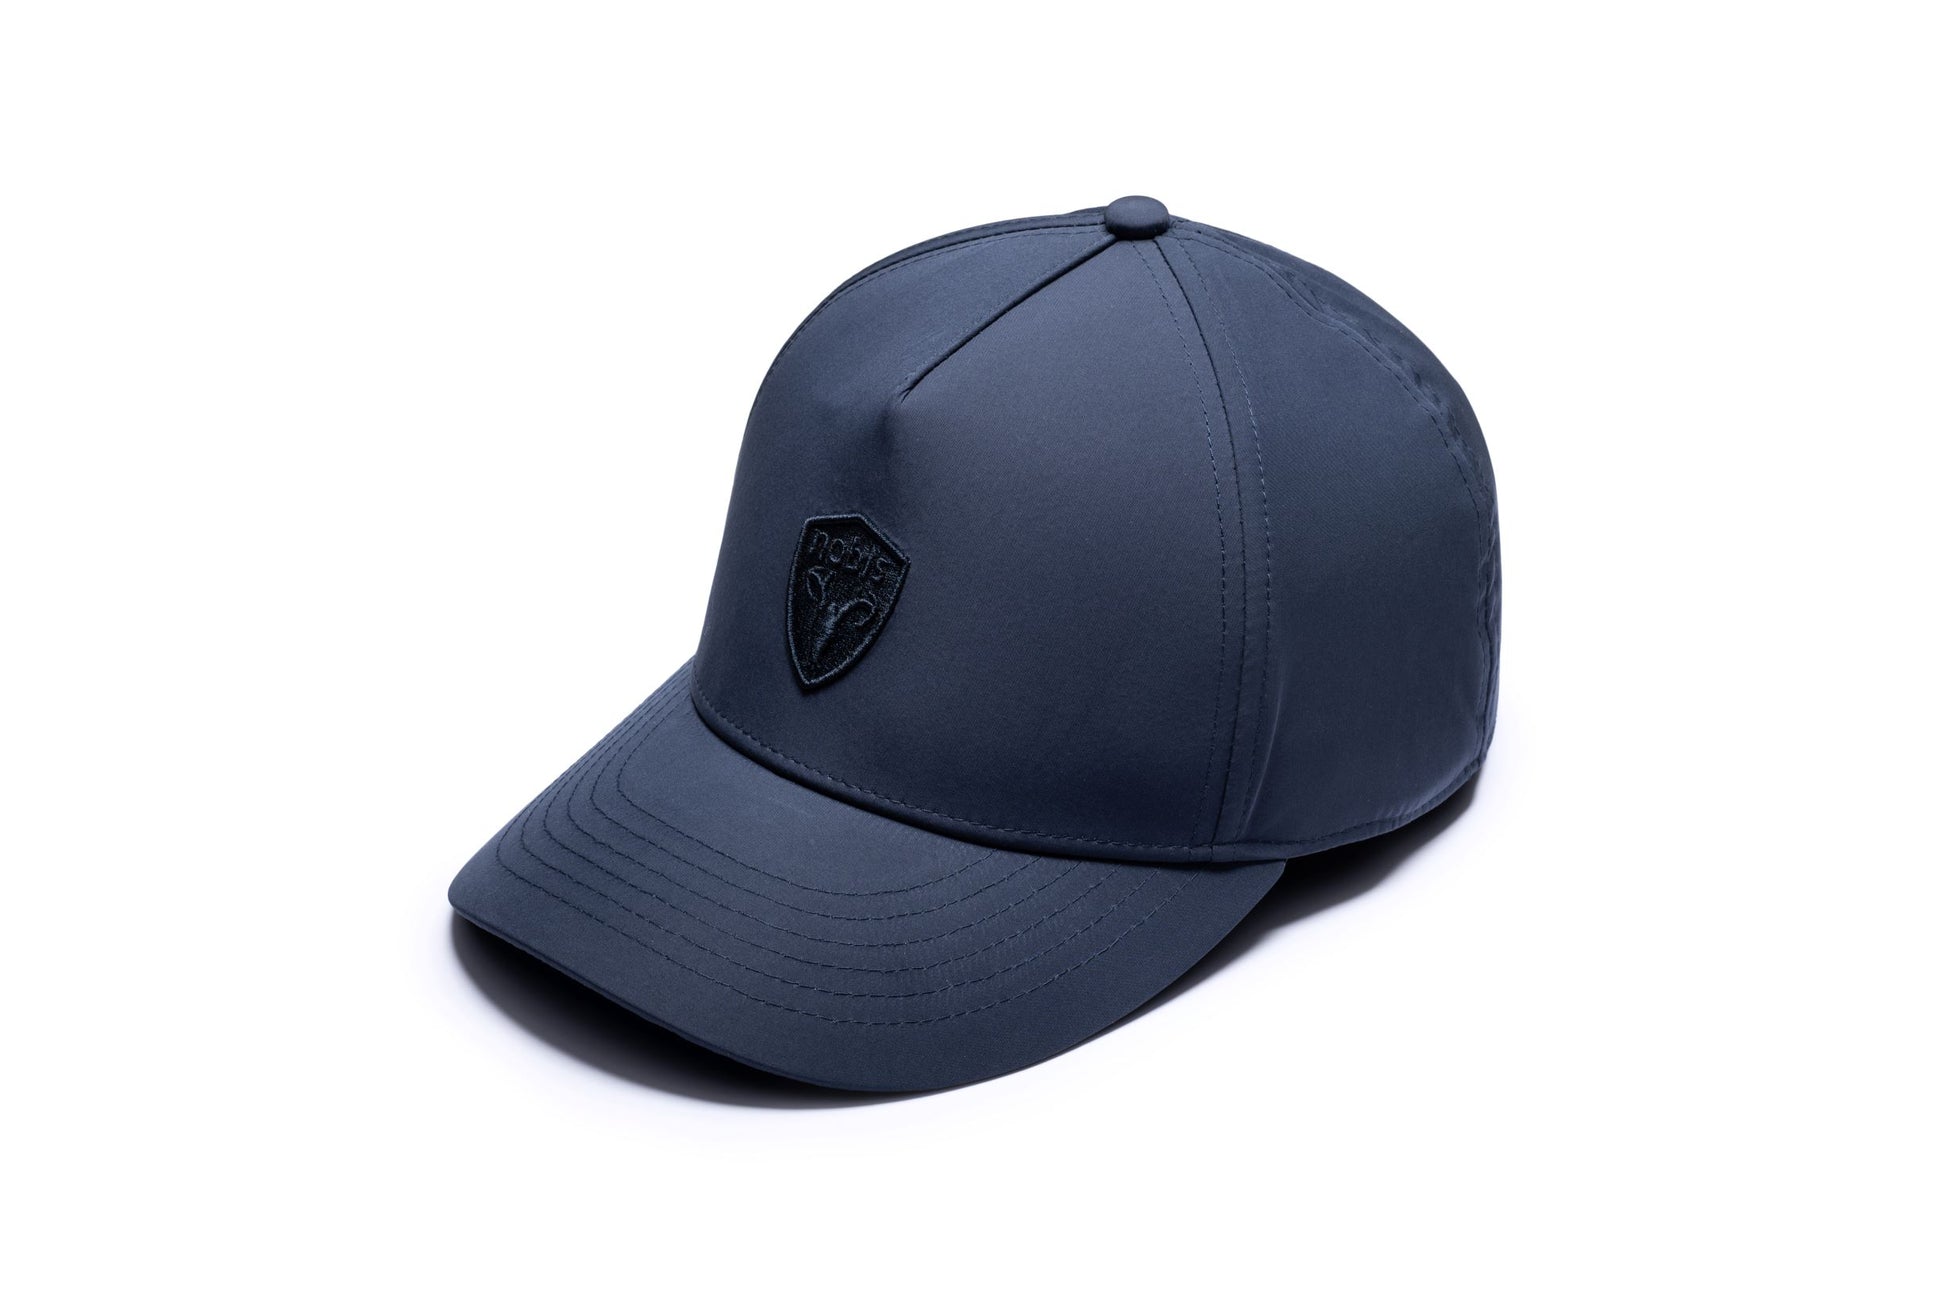 Satine Adjustable Cap in 5-panel construction, mid height crown, curved peak brim, and adjustable strap closure, in Marine